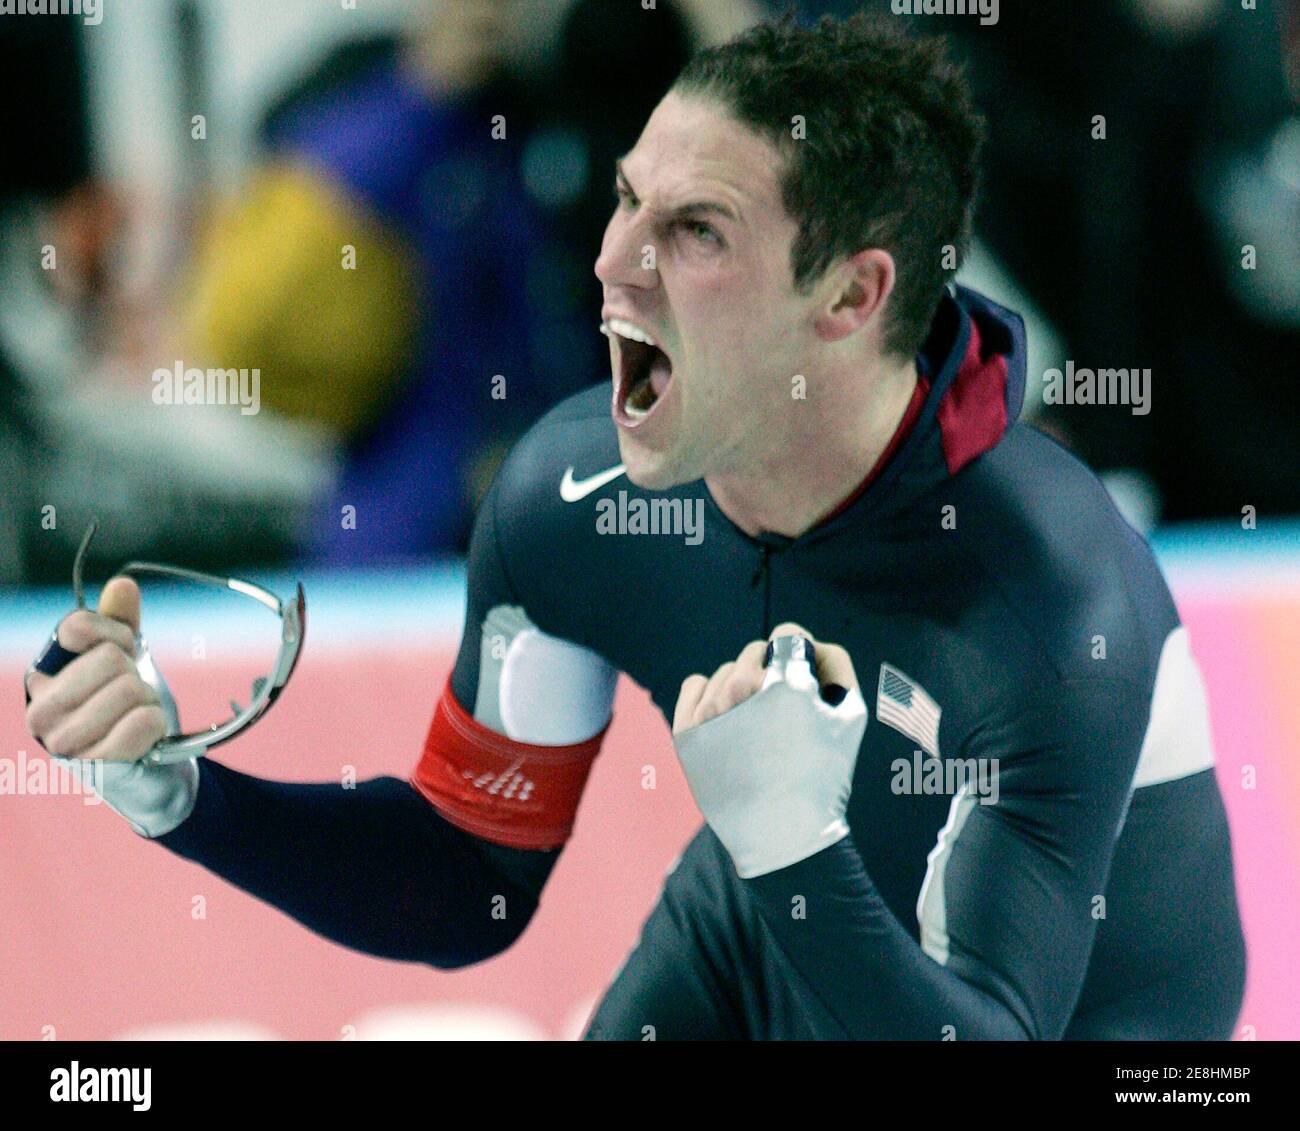 Chad Hedrick from the U.S. celebrates after winning the men's speed skating 5000 metres race at the Torino 2006 Winter Olympic Games in Turin, Italy February 11, 2006. Hedrick won the gold medal. REUTERS/Andy Clark Stock Photo